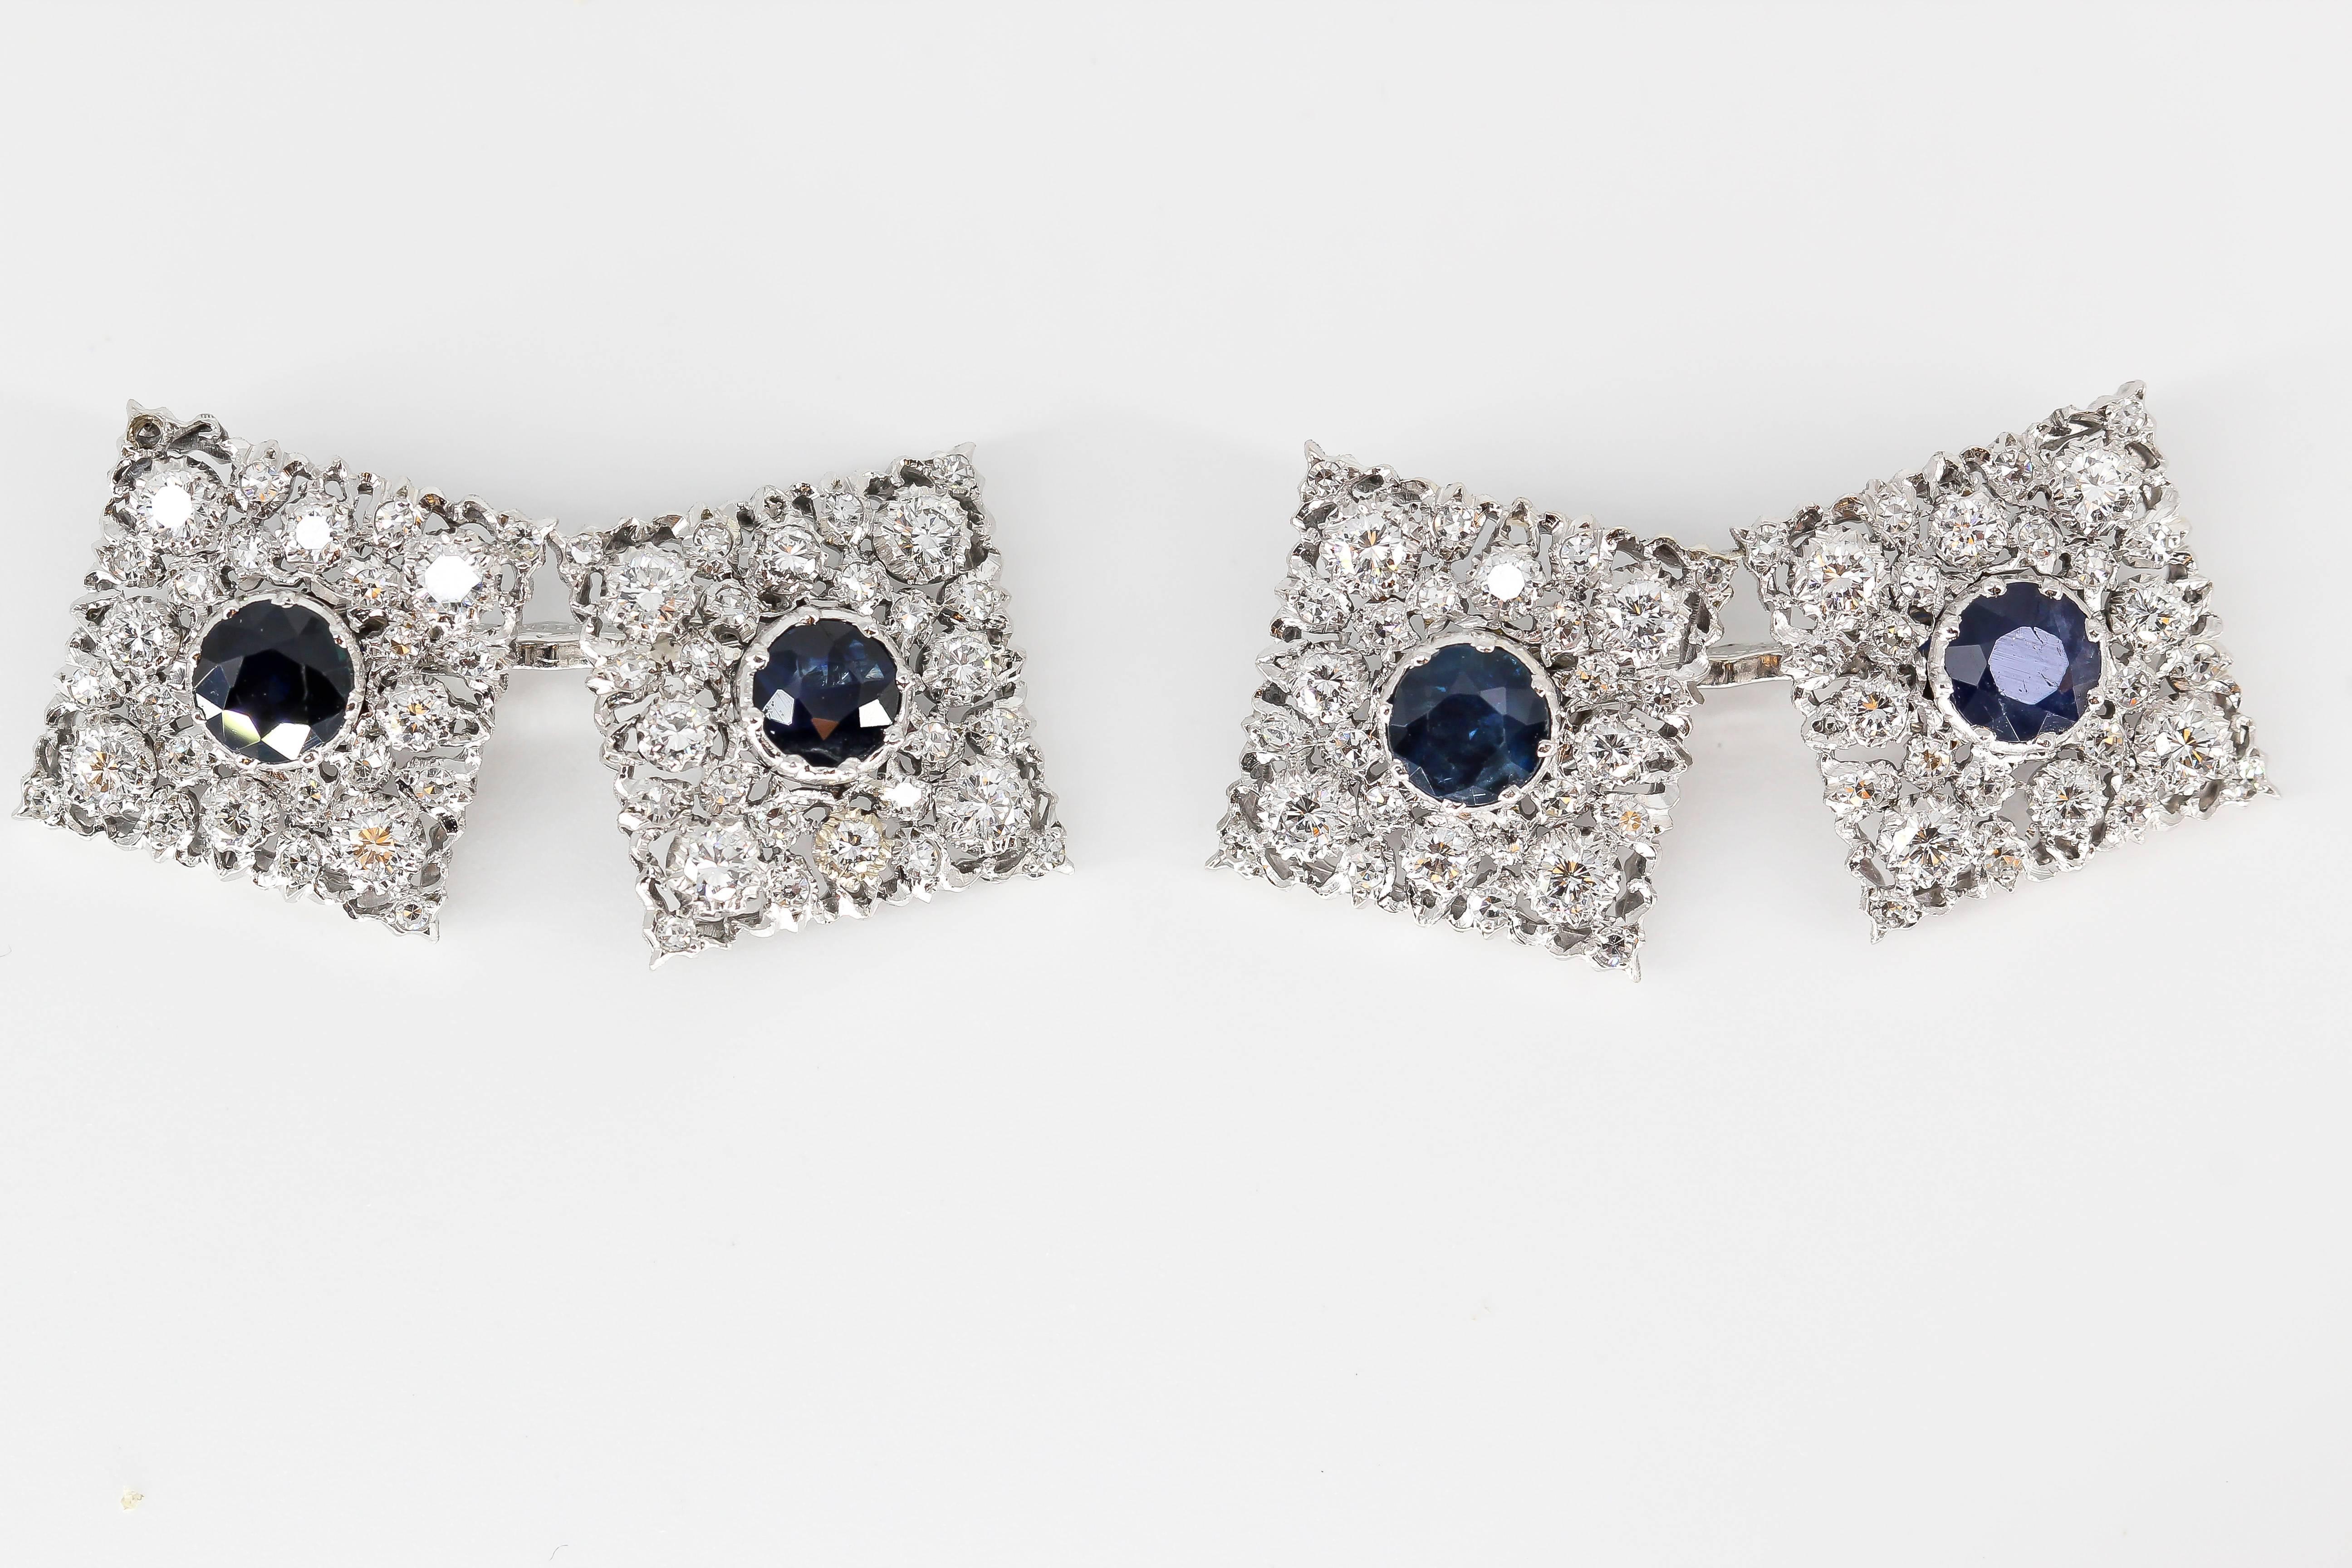 Dazzling blue sapphire, diamond and 18K white gold square cufflinks by Mario Buccellati. They feature rich round blue sapphires at the center, surrounded by high grade round brilliant cut diamonds in an intricate gold lattice setting that has been a